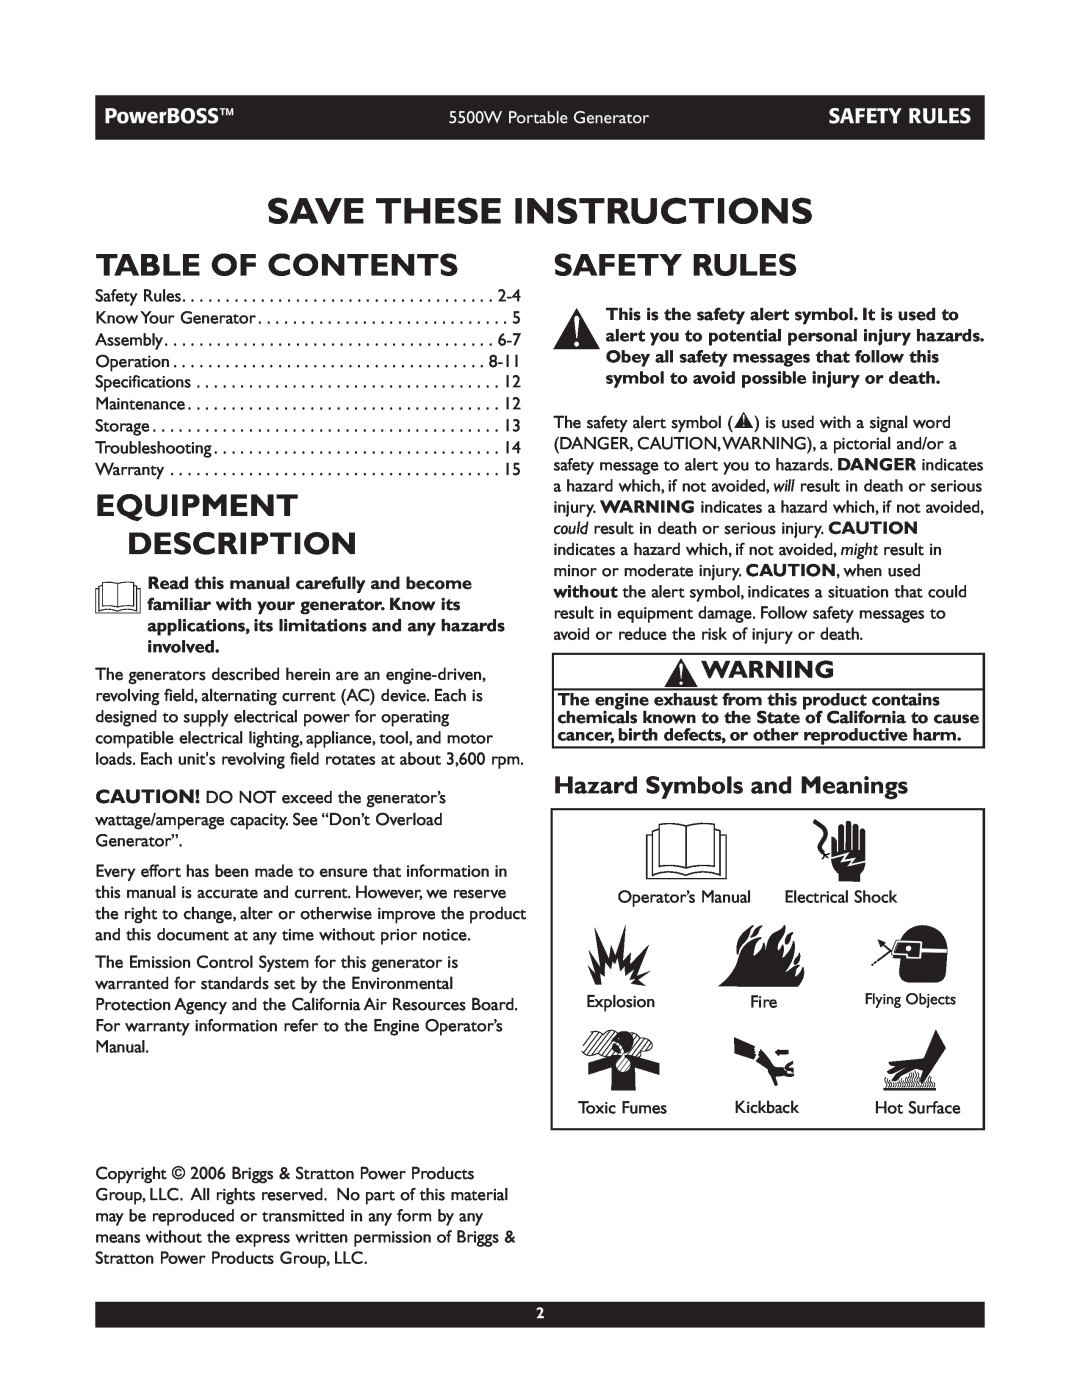 Briggs & Stratton 030249 Table Of Contents, Equipment Description, Safety Rules, Hazard Symbols and Meanings, PowerBOSS 